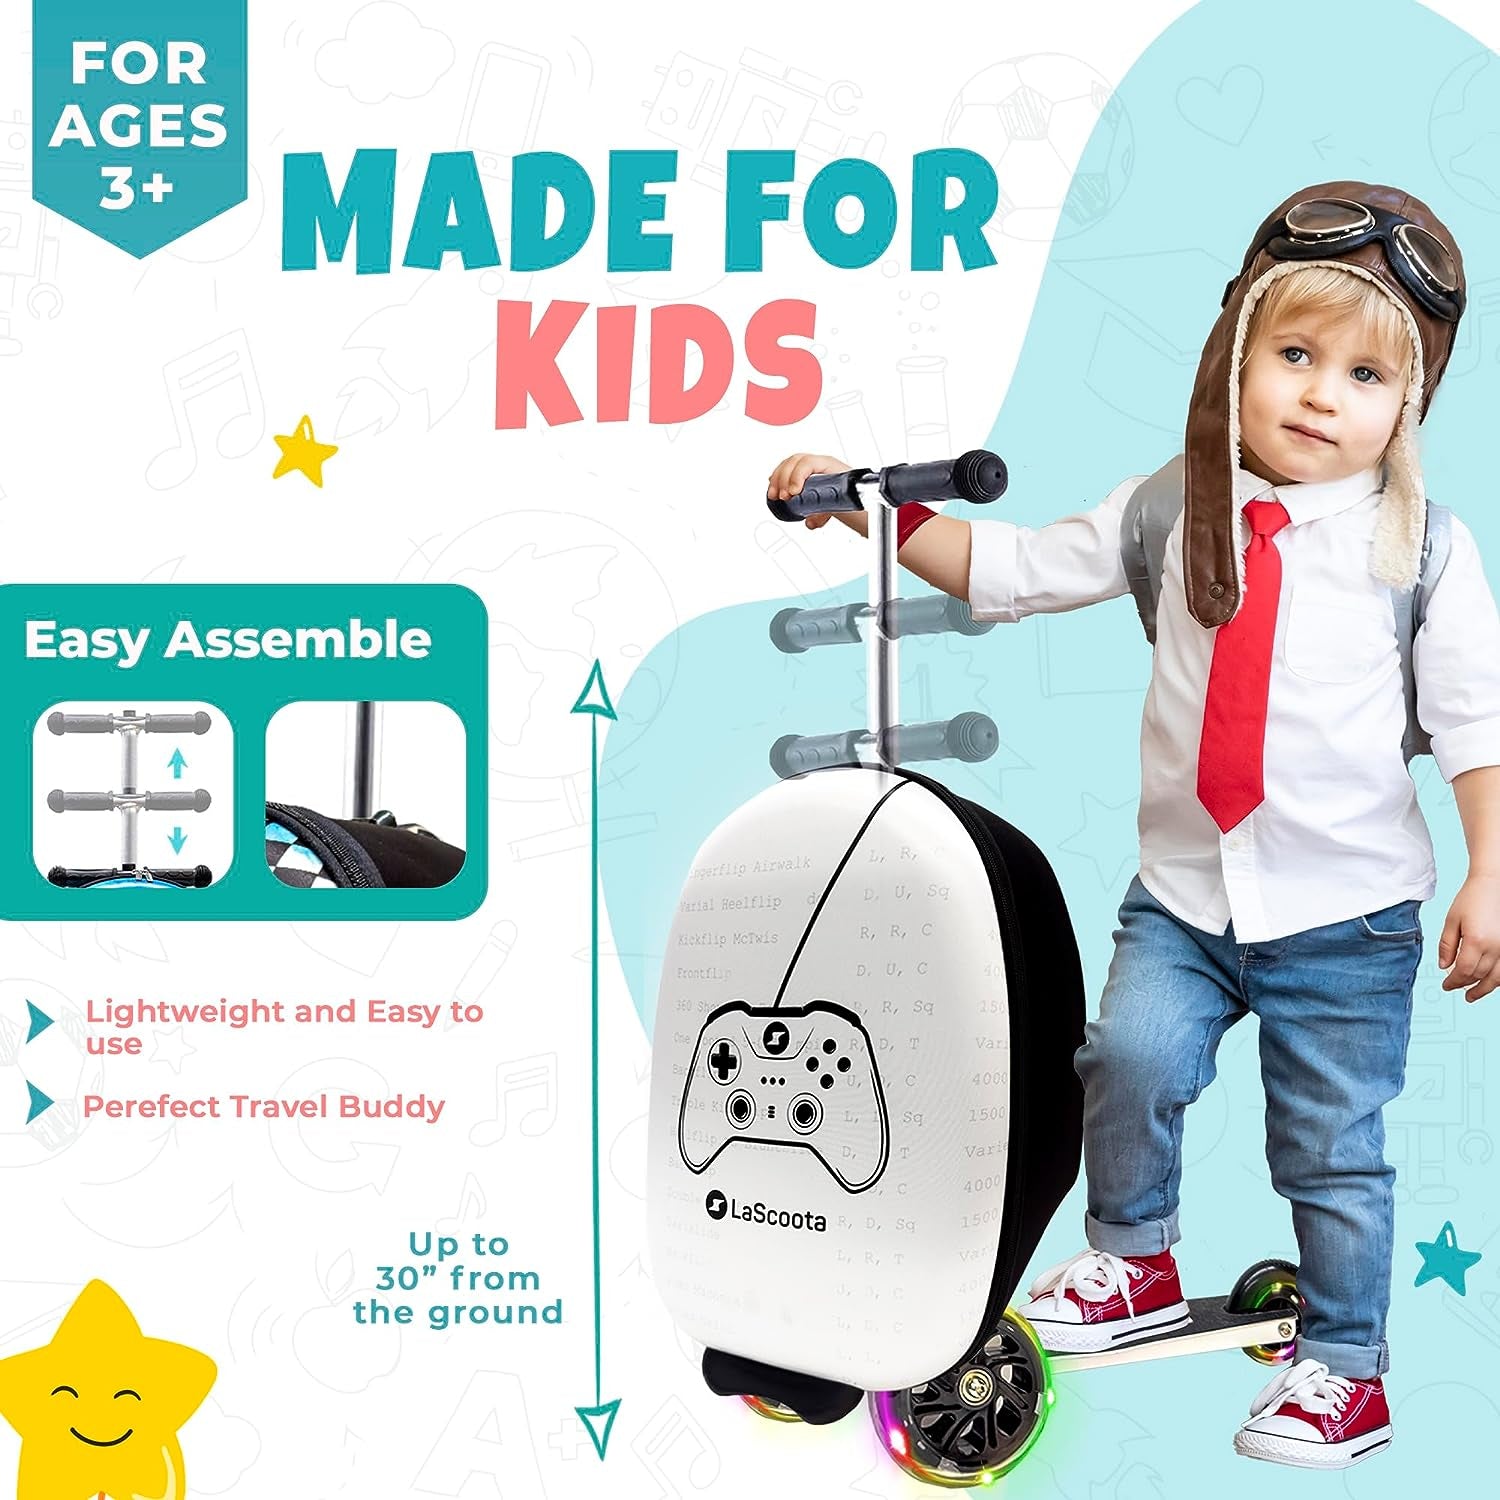 Scooter Suitcase, Foldable Scooter Luggage for Kids - Lightweight Kids Ride on Luggage Scooter with Wheels, LED Lights - Videogame Graphic Suitcase Scooter, Ride on Suitcase for Kids Ages 2-5